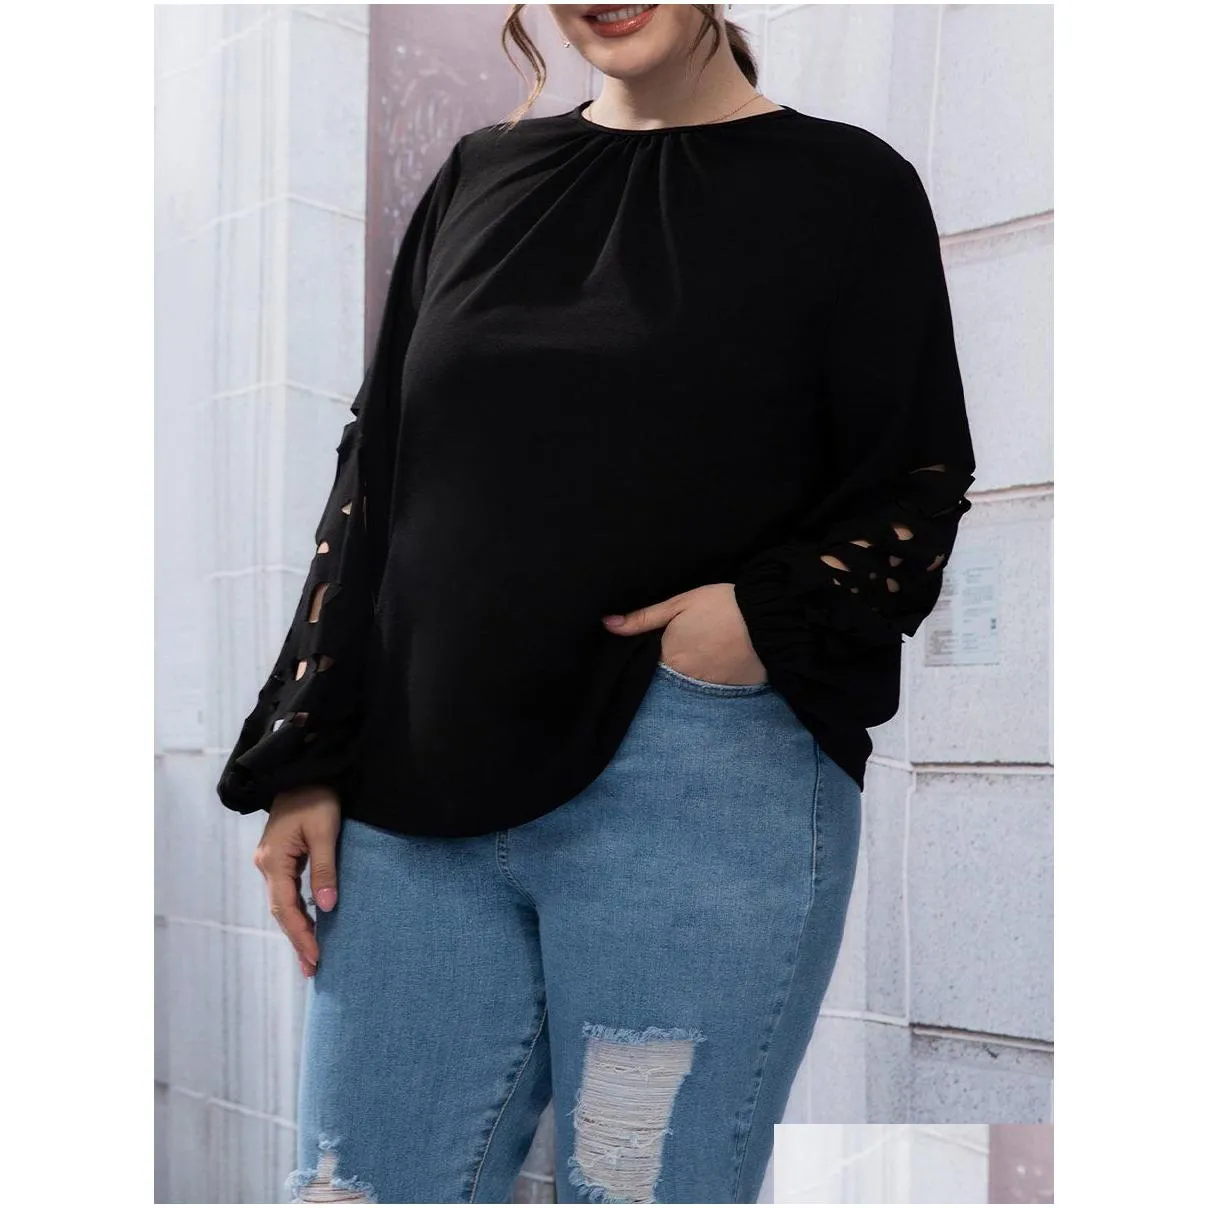 finjani Plus Size Women Blouse Guipure Lace Insert O-Neck Mesh Blouse Top Casual Clothing For Autumn New 931T#